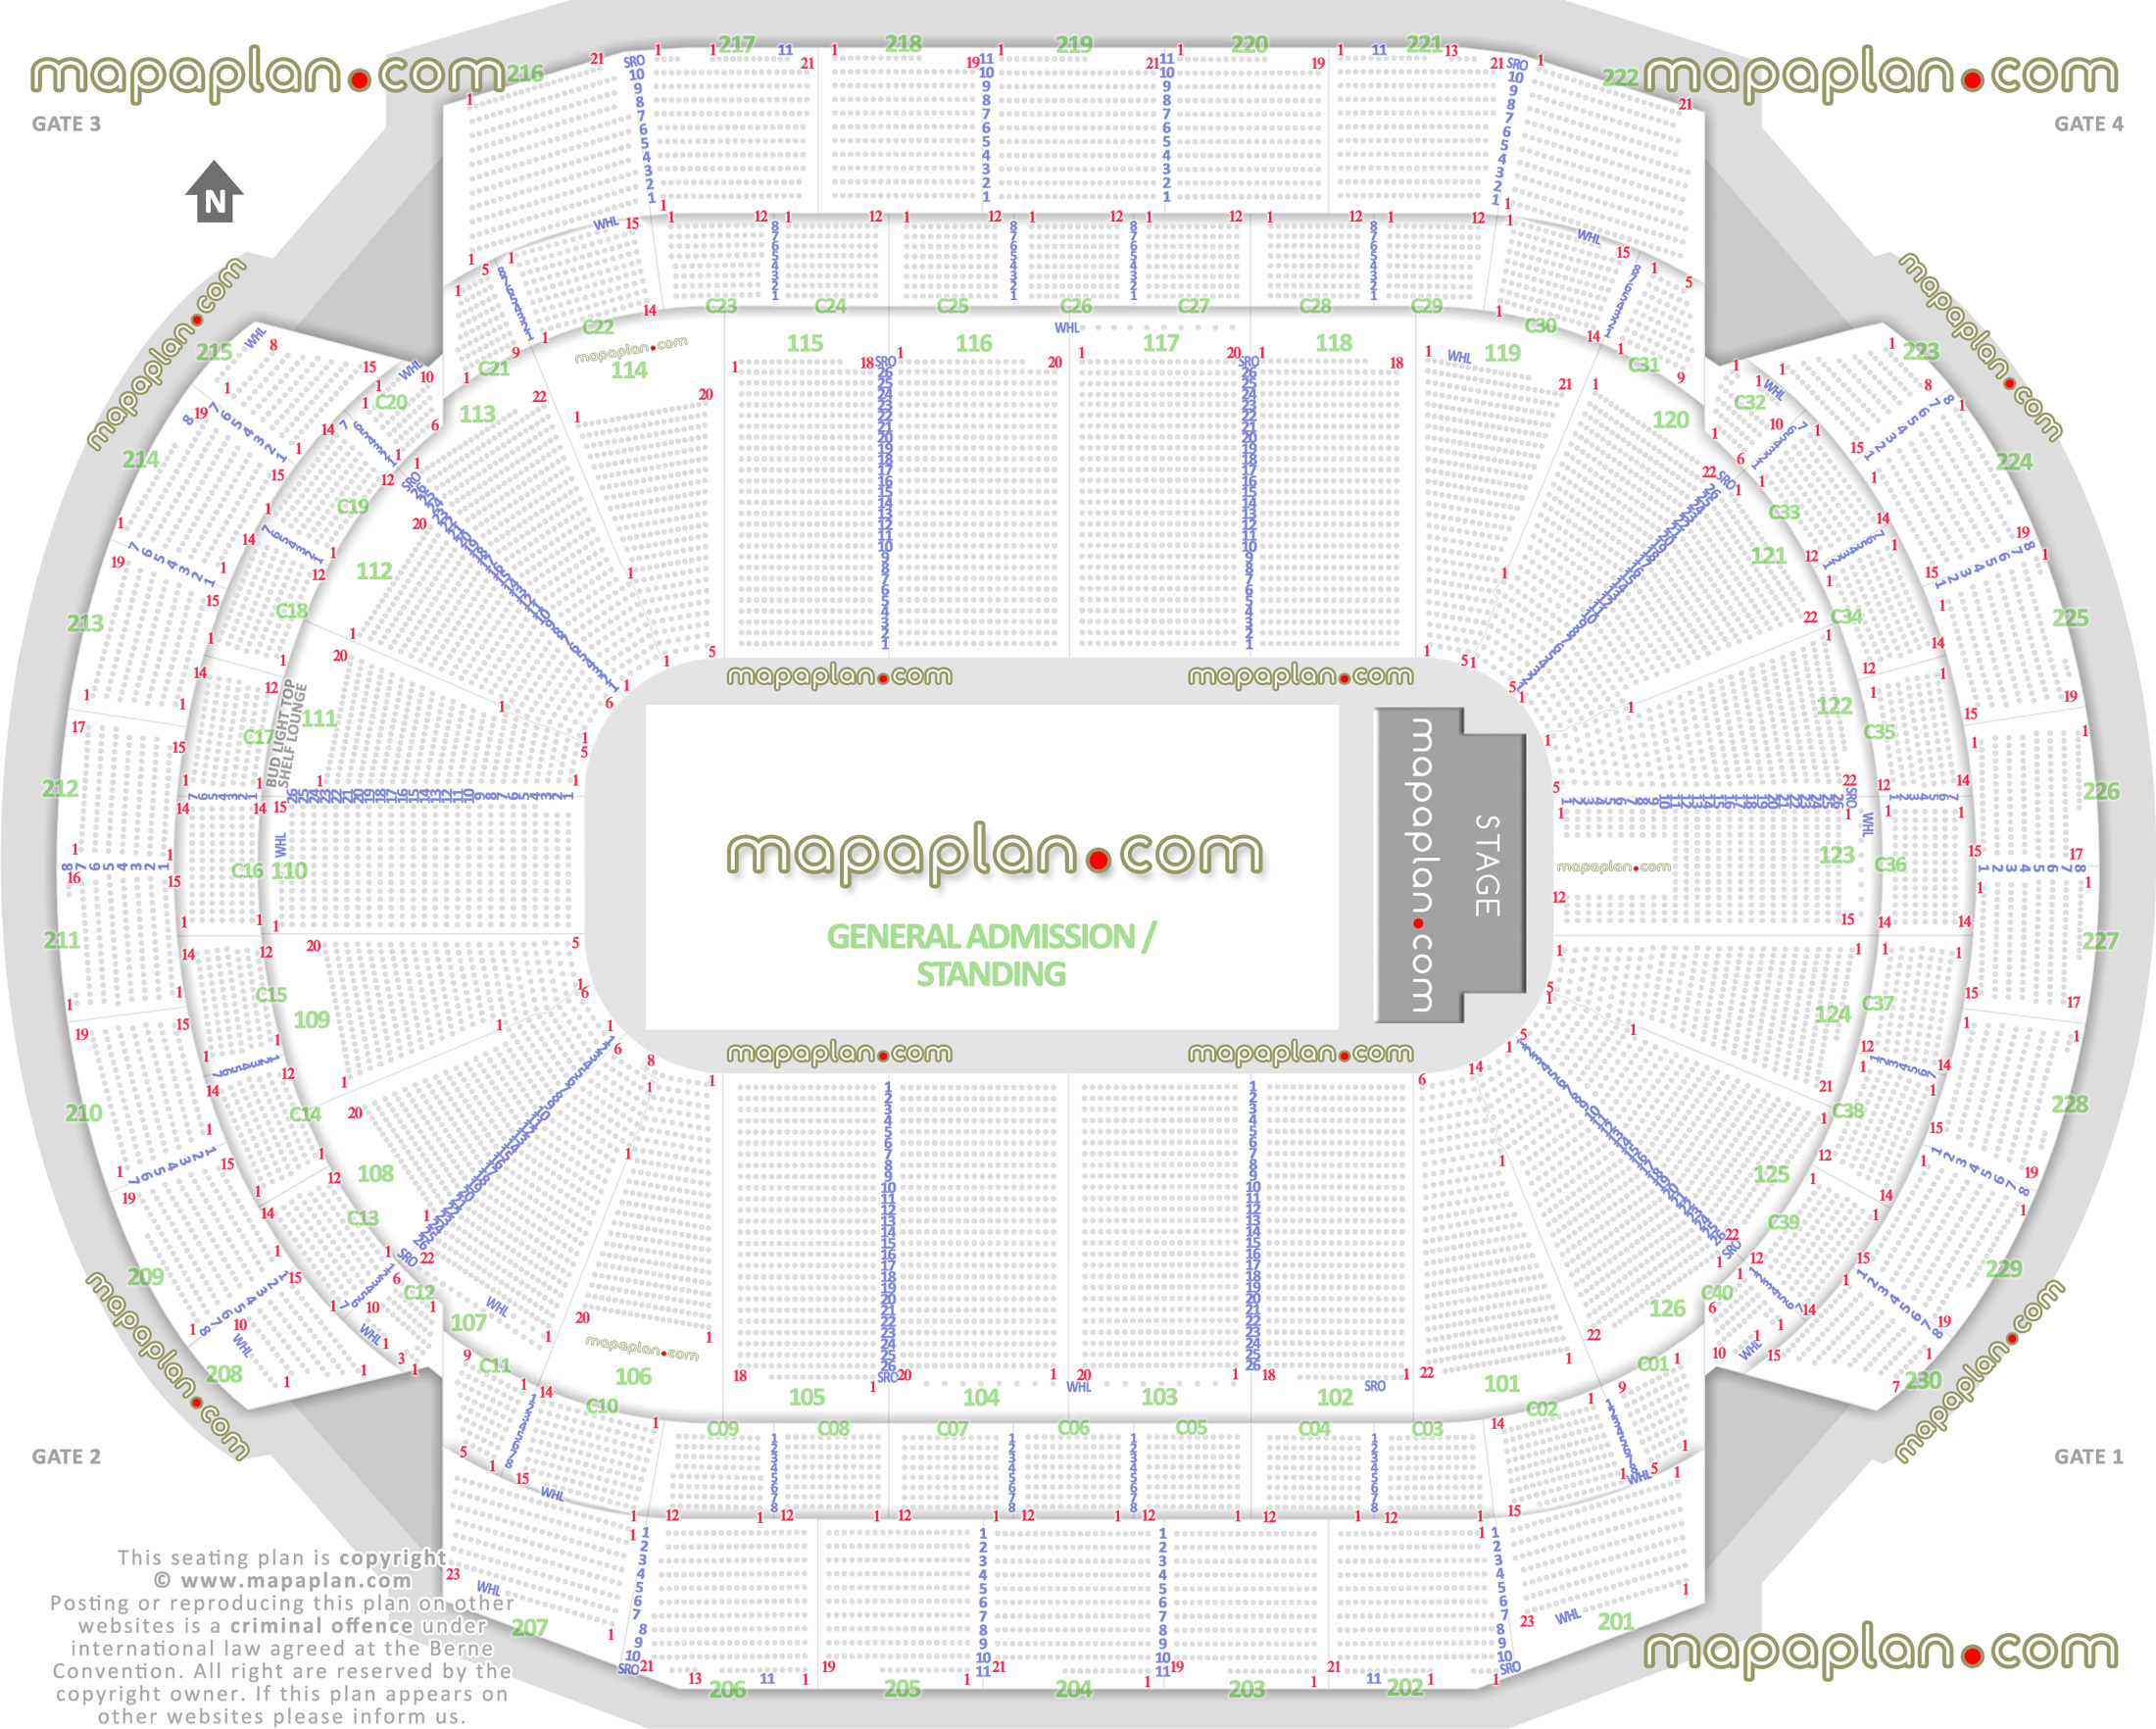 general admission ga floor standing concert capacity 3d plan Xcel Energy Center mn concert stage detailed floor pit plan sections best seat numbers selection information guide virtual interactive image map rows 1 2 3 4 5 6 7 8 9 10 11 12 13 14 15 16 17 18 19 20 21 22 23 24 25 26 Saint Paul Xcel Energy Center seating chart